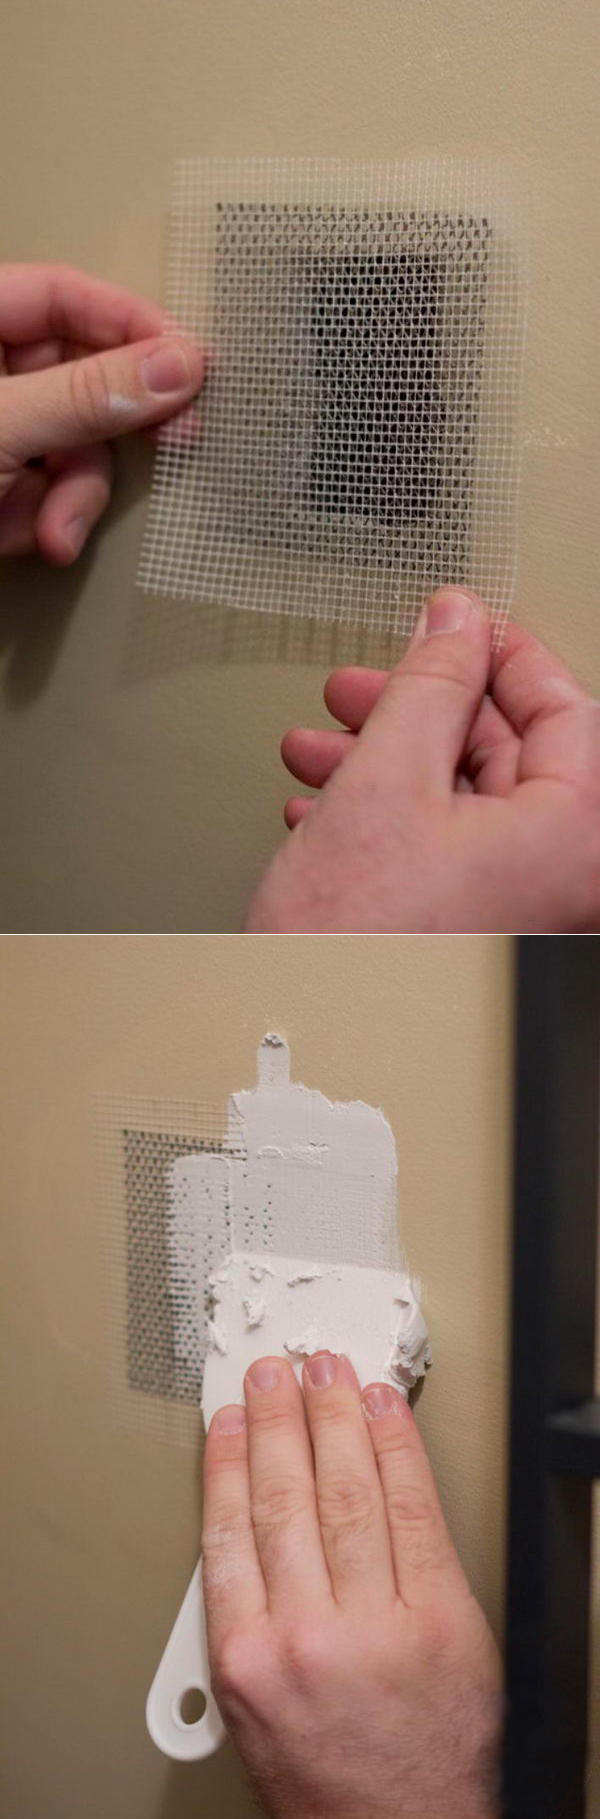 YITAP at discount joint tape how to use for holes